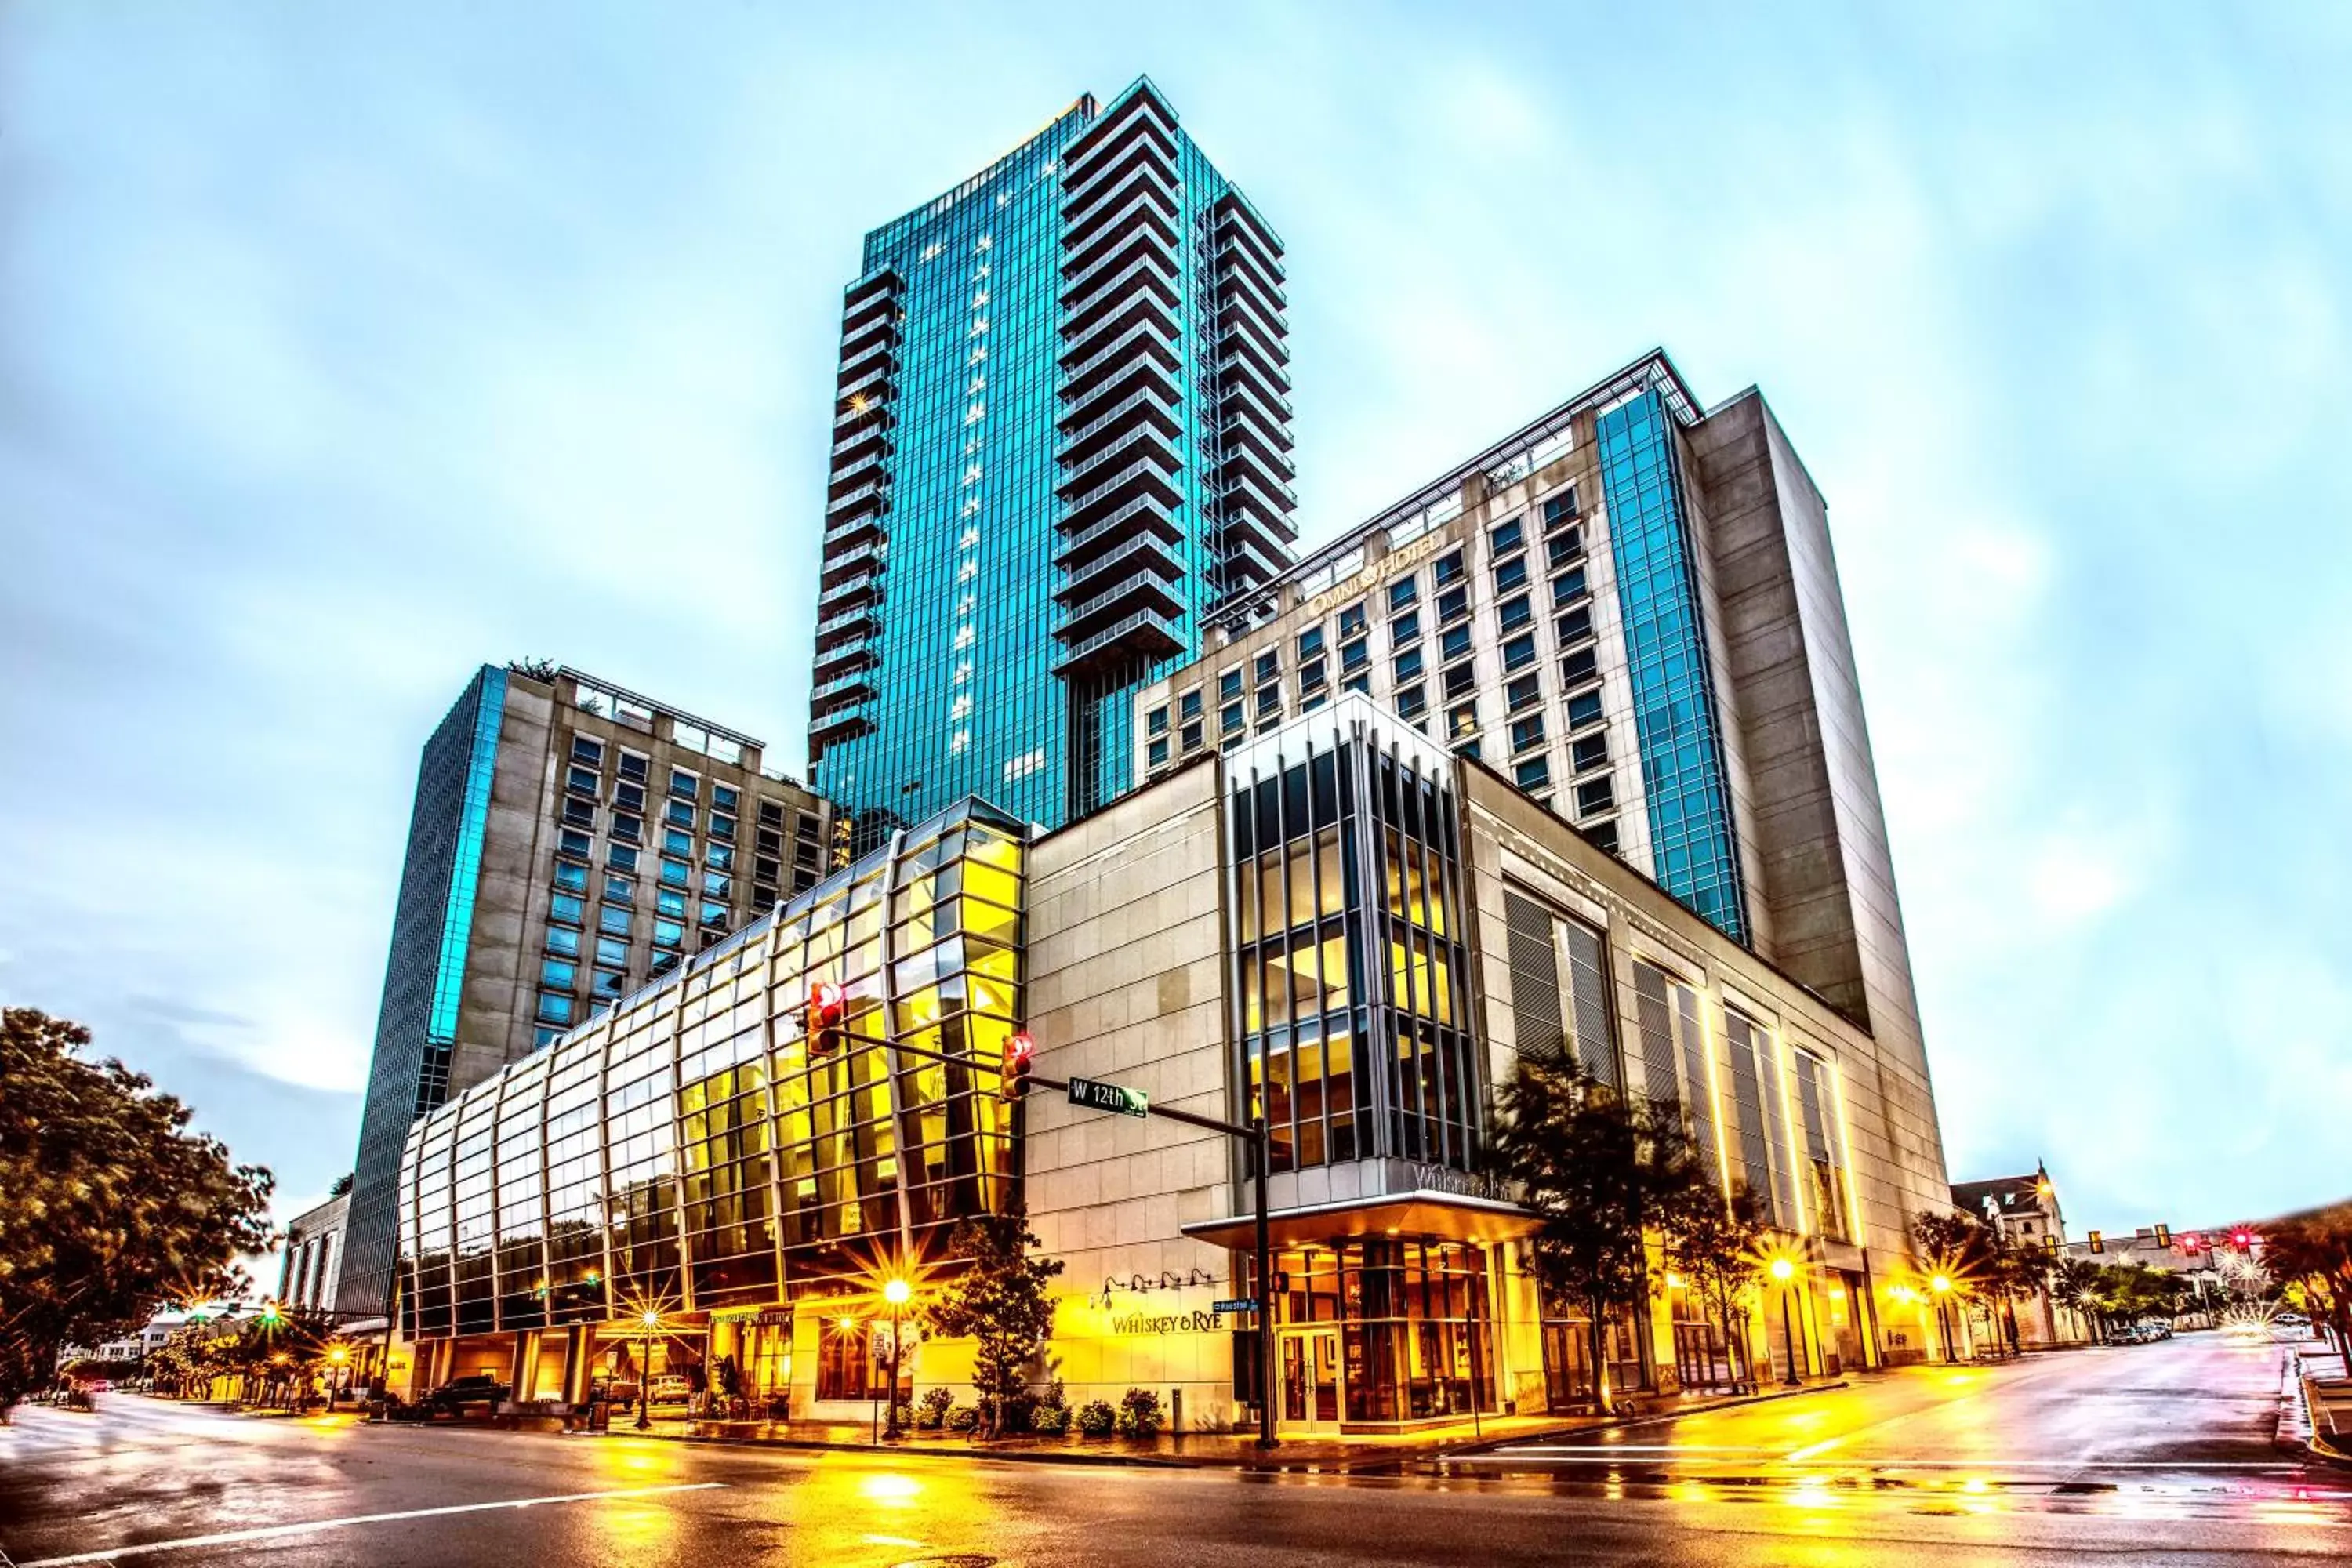 Property building in Omni Fort Worth Hotel